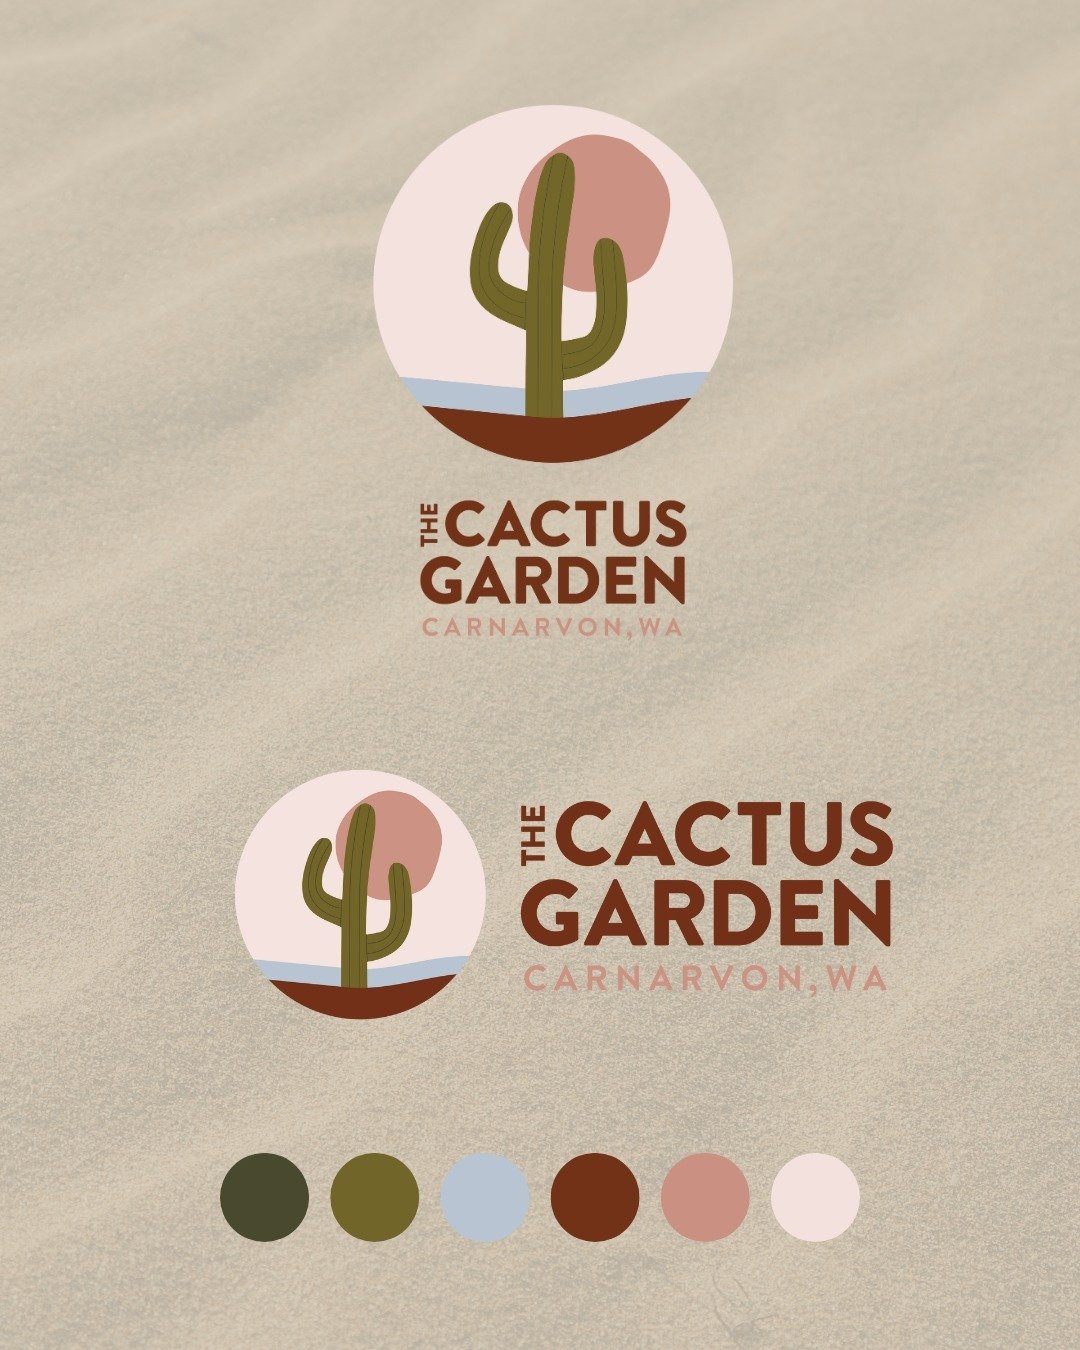 New Logo Launch! 
Introducing the fresh face of the @the_cactus_garden_carnarvon ✨ 
Our team designed a vibrant visual identity that perfectly captures the quirky charm of this prickly paradise 🌵
Get a little wild and experience the magic of the Cac